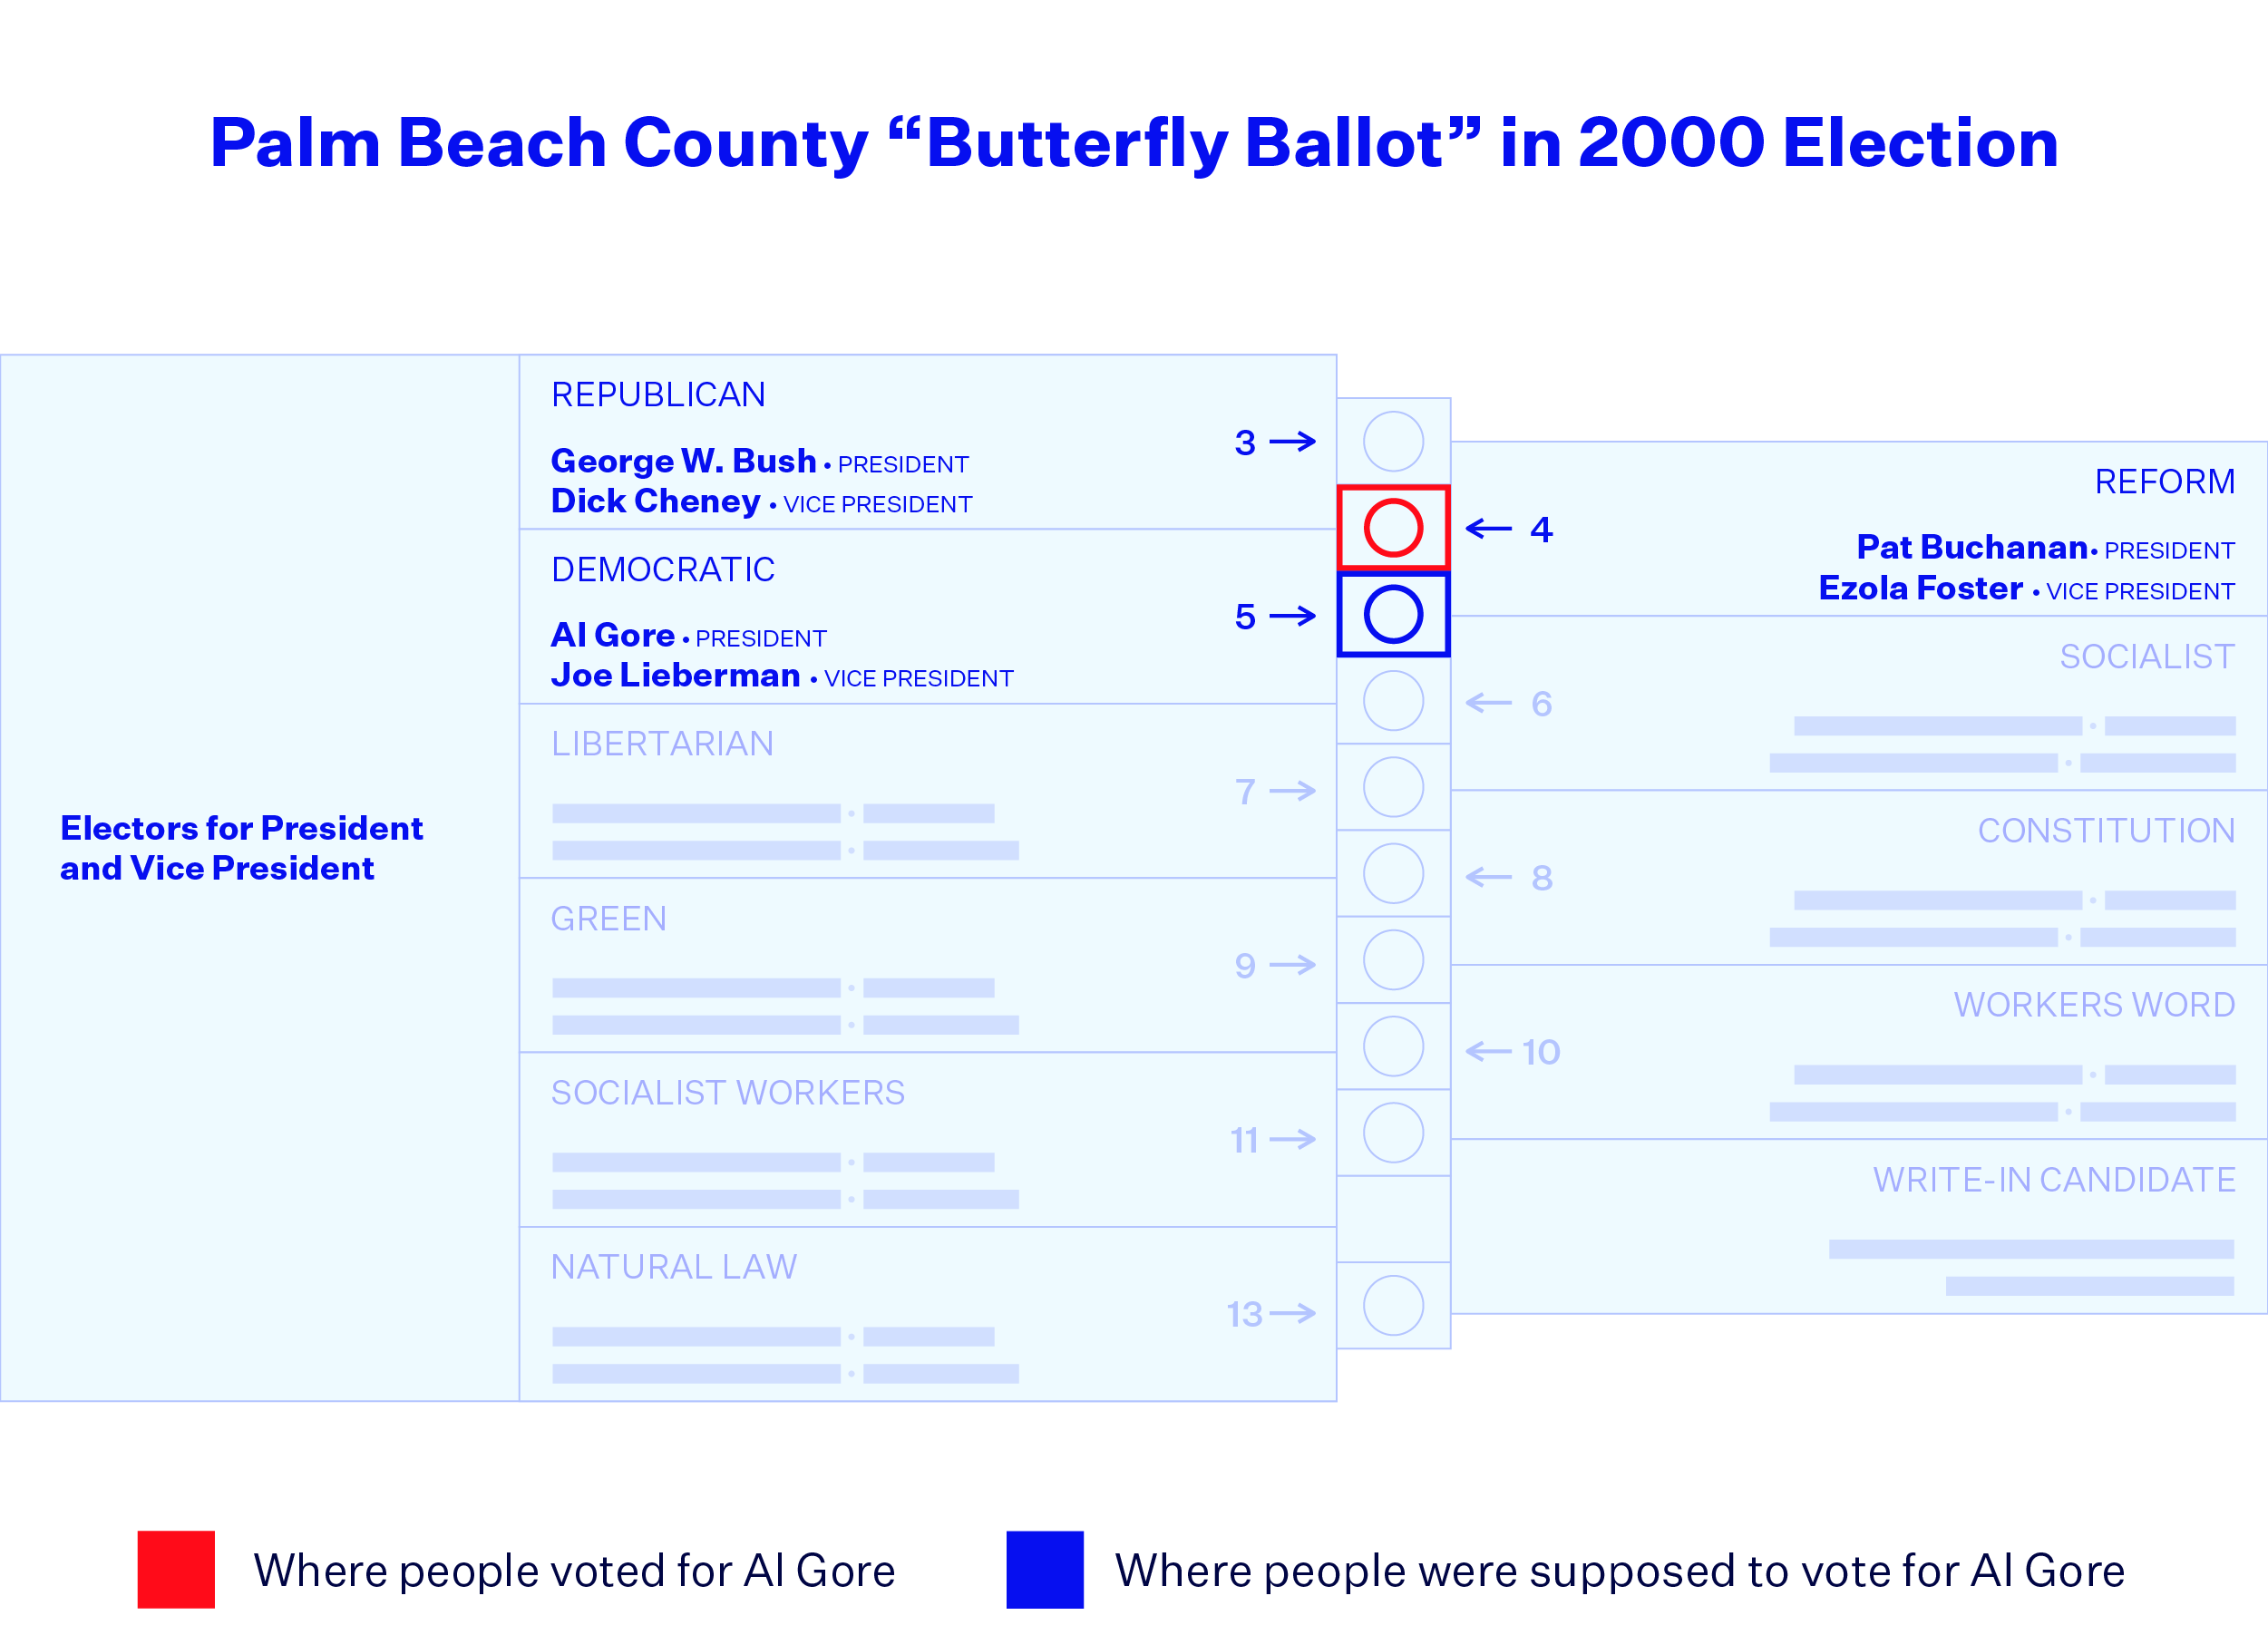 Reproduction of the Palm Beach County Butterfly Ballot in the 2000 Election. Left hand directions reads "Electors for President and Vice President" with a column of candidates on the left page and a column on the right page. A punchcard goes down the middle and red and blue boxes identify where people mistakenly voted fro Al Gore vs. where they were supposed to. 